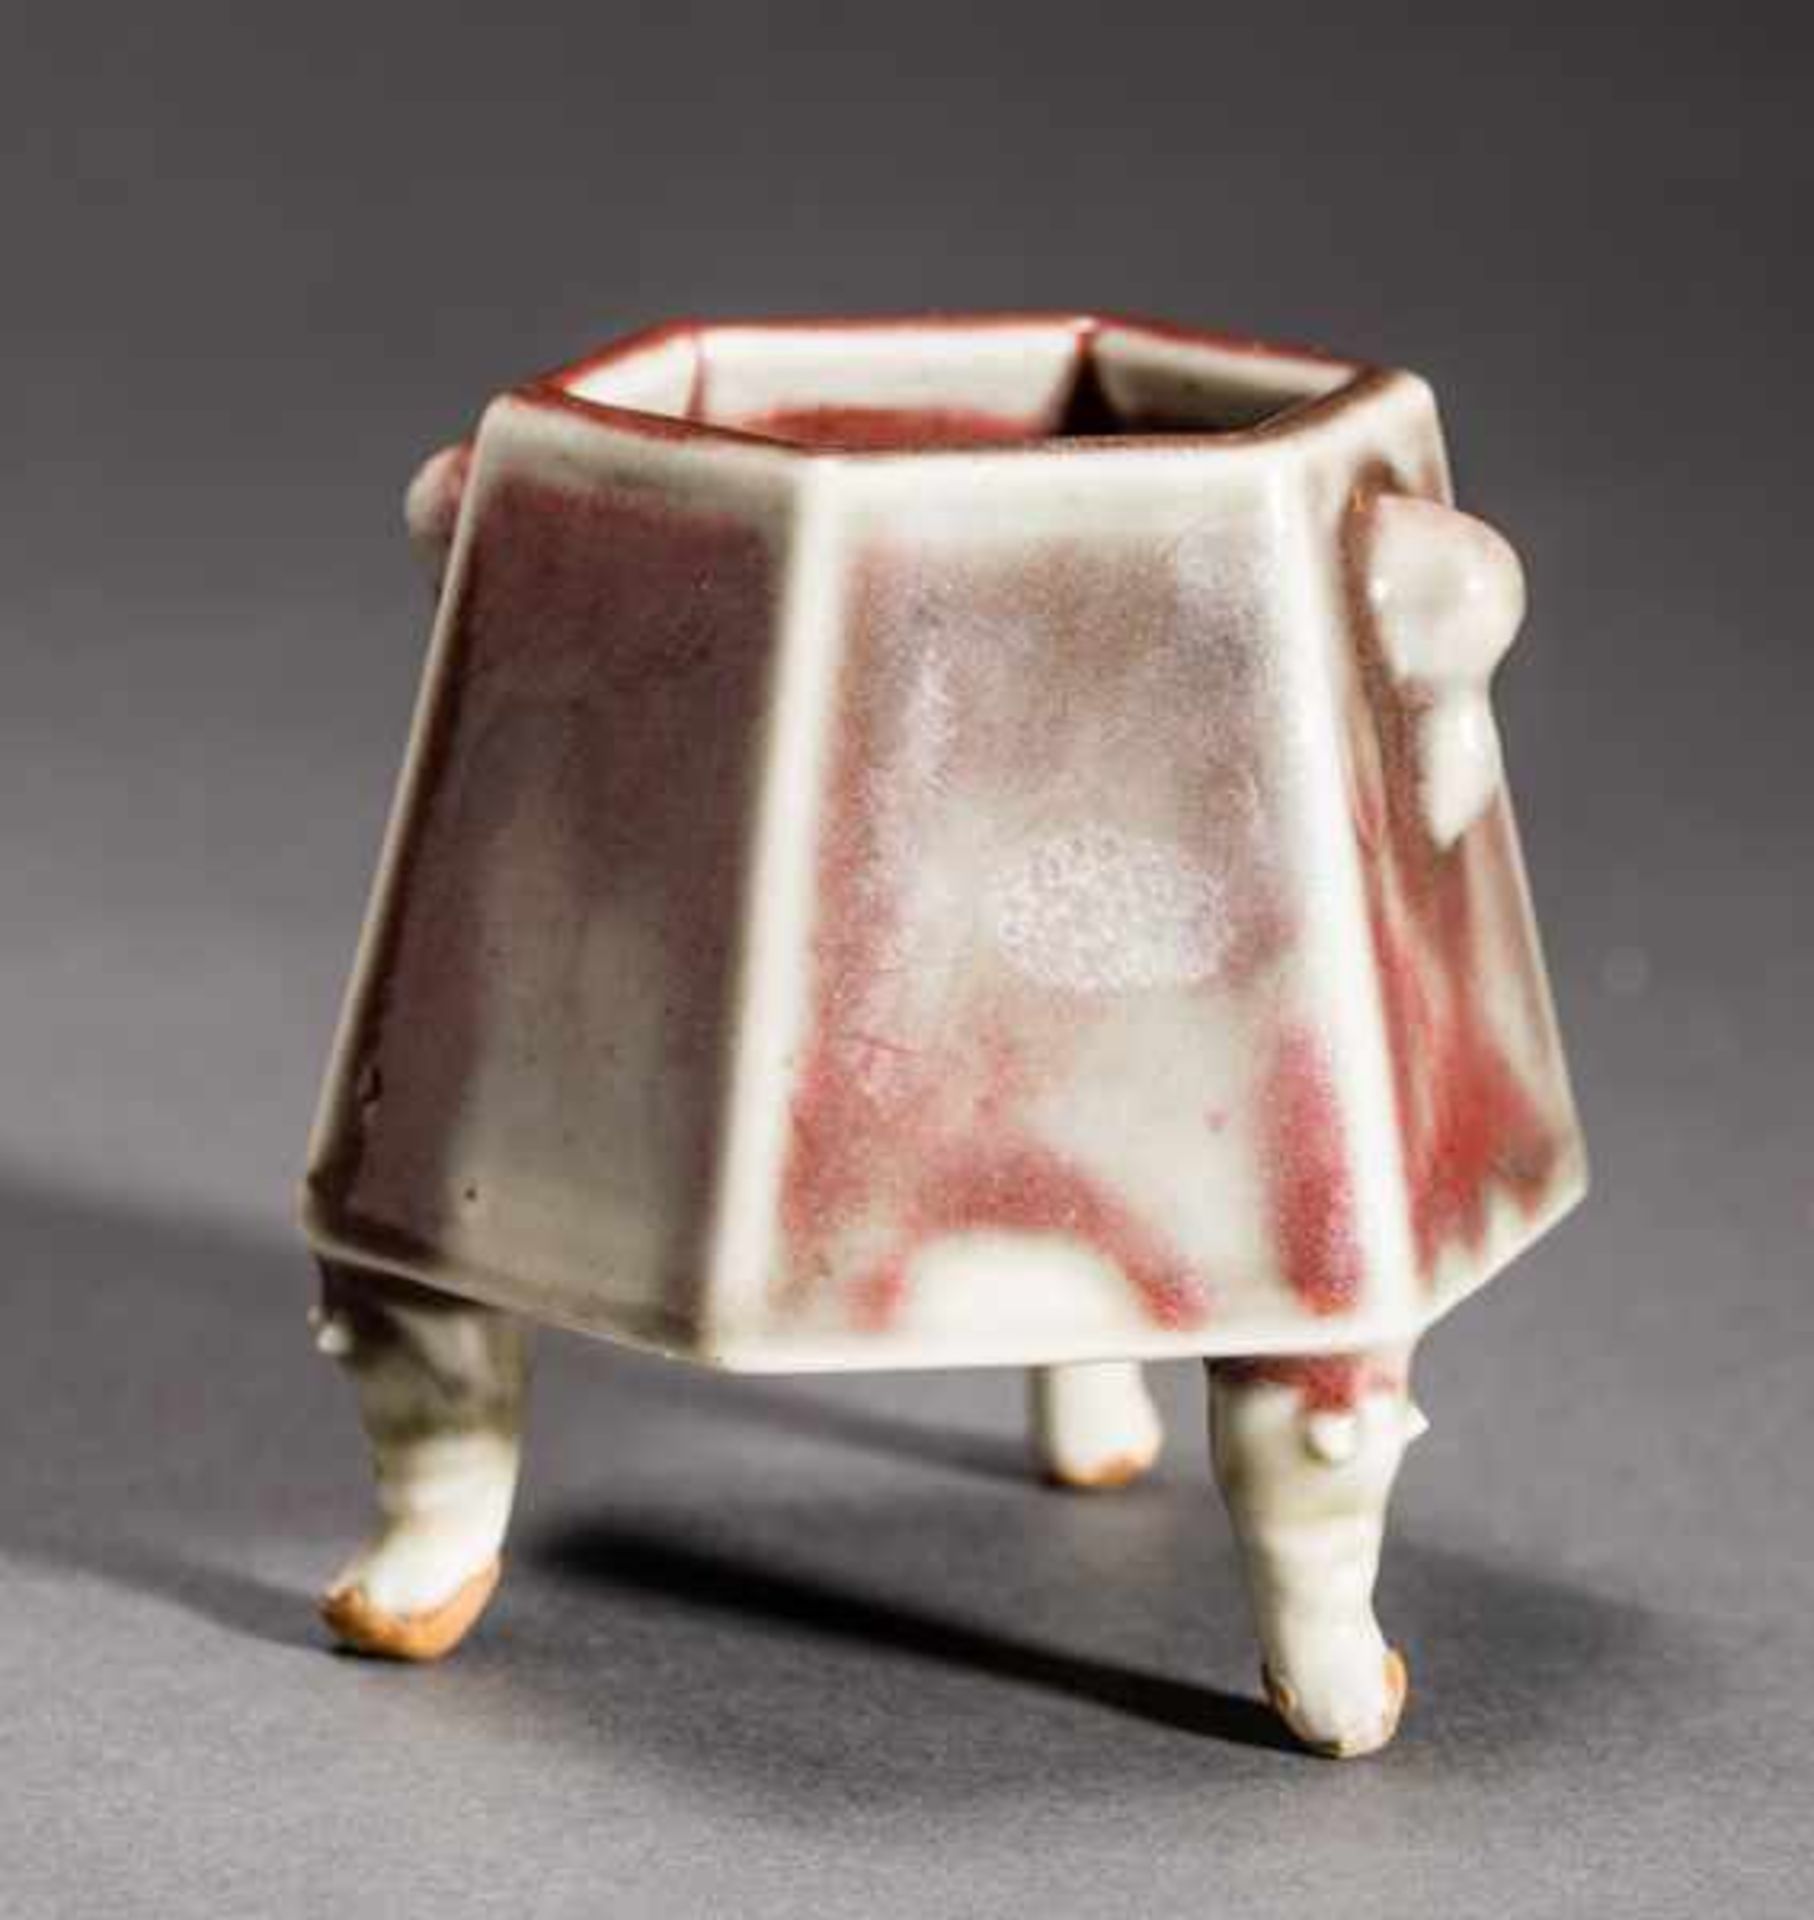 THREE-FOOTED CUP Porcelain. China, Qing dynasty (1644-1911)Very attractive, small vessel with a - Image 2 of 5